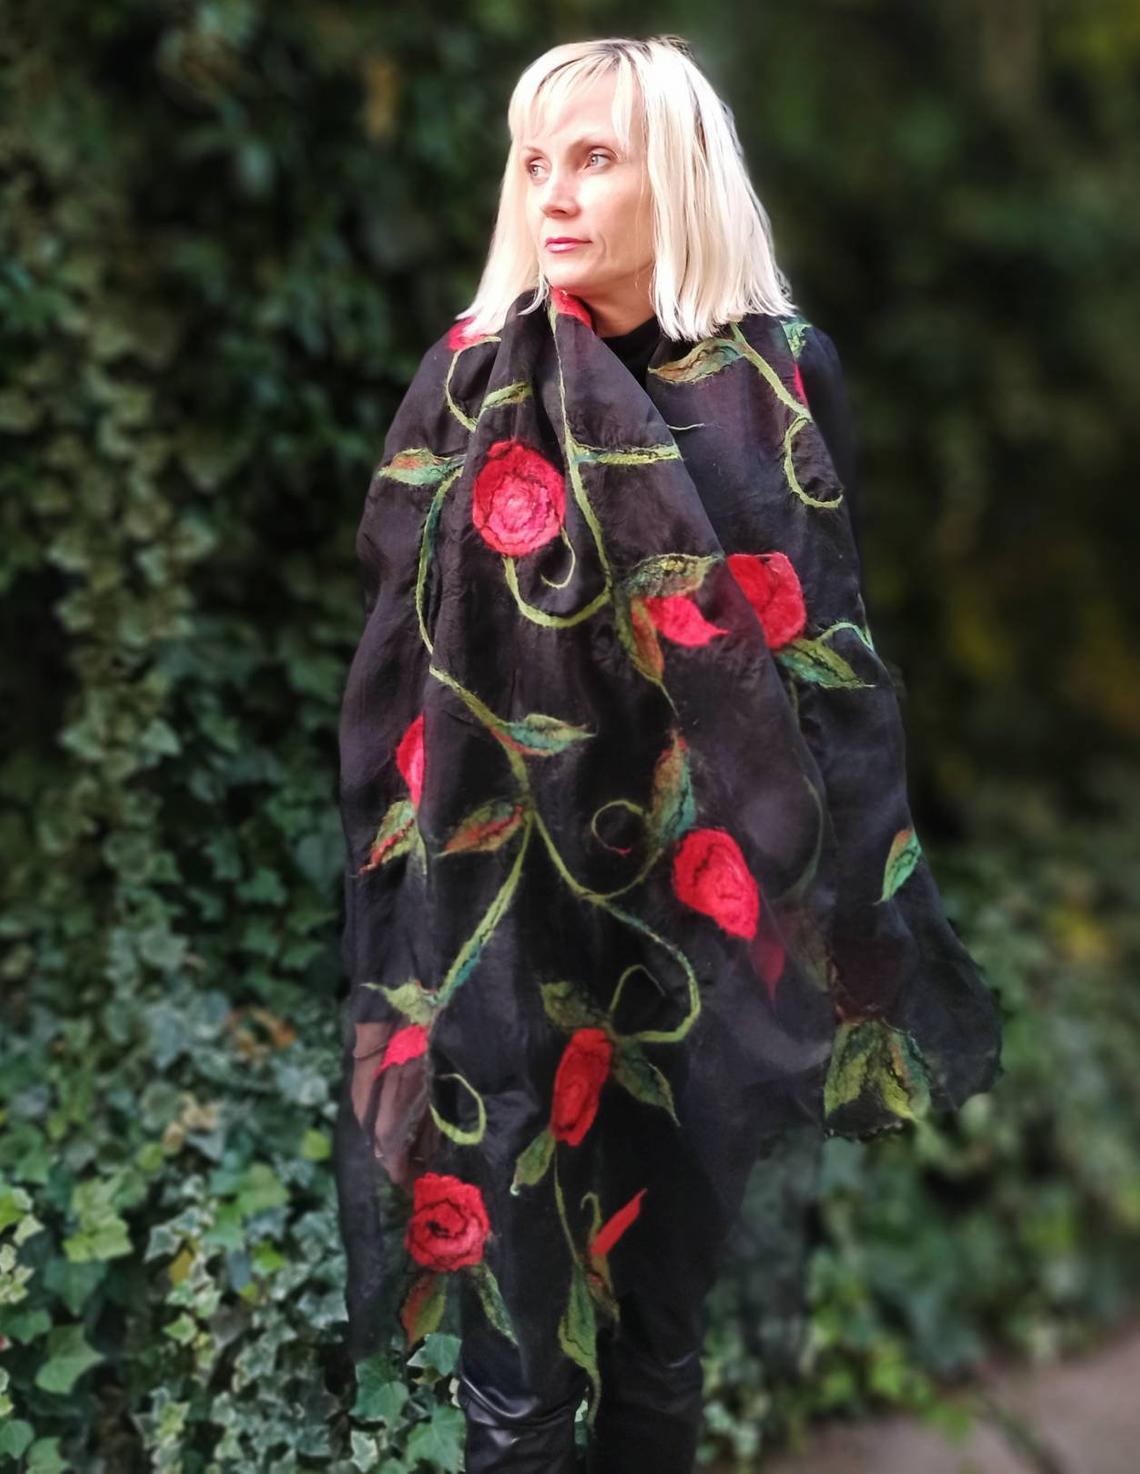 Red and black wetfelted silk organza and merino wool decor stole. Elegant accessory to define simple outfit. Best gift for women.